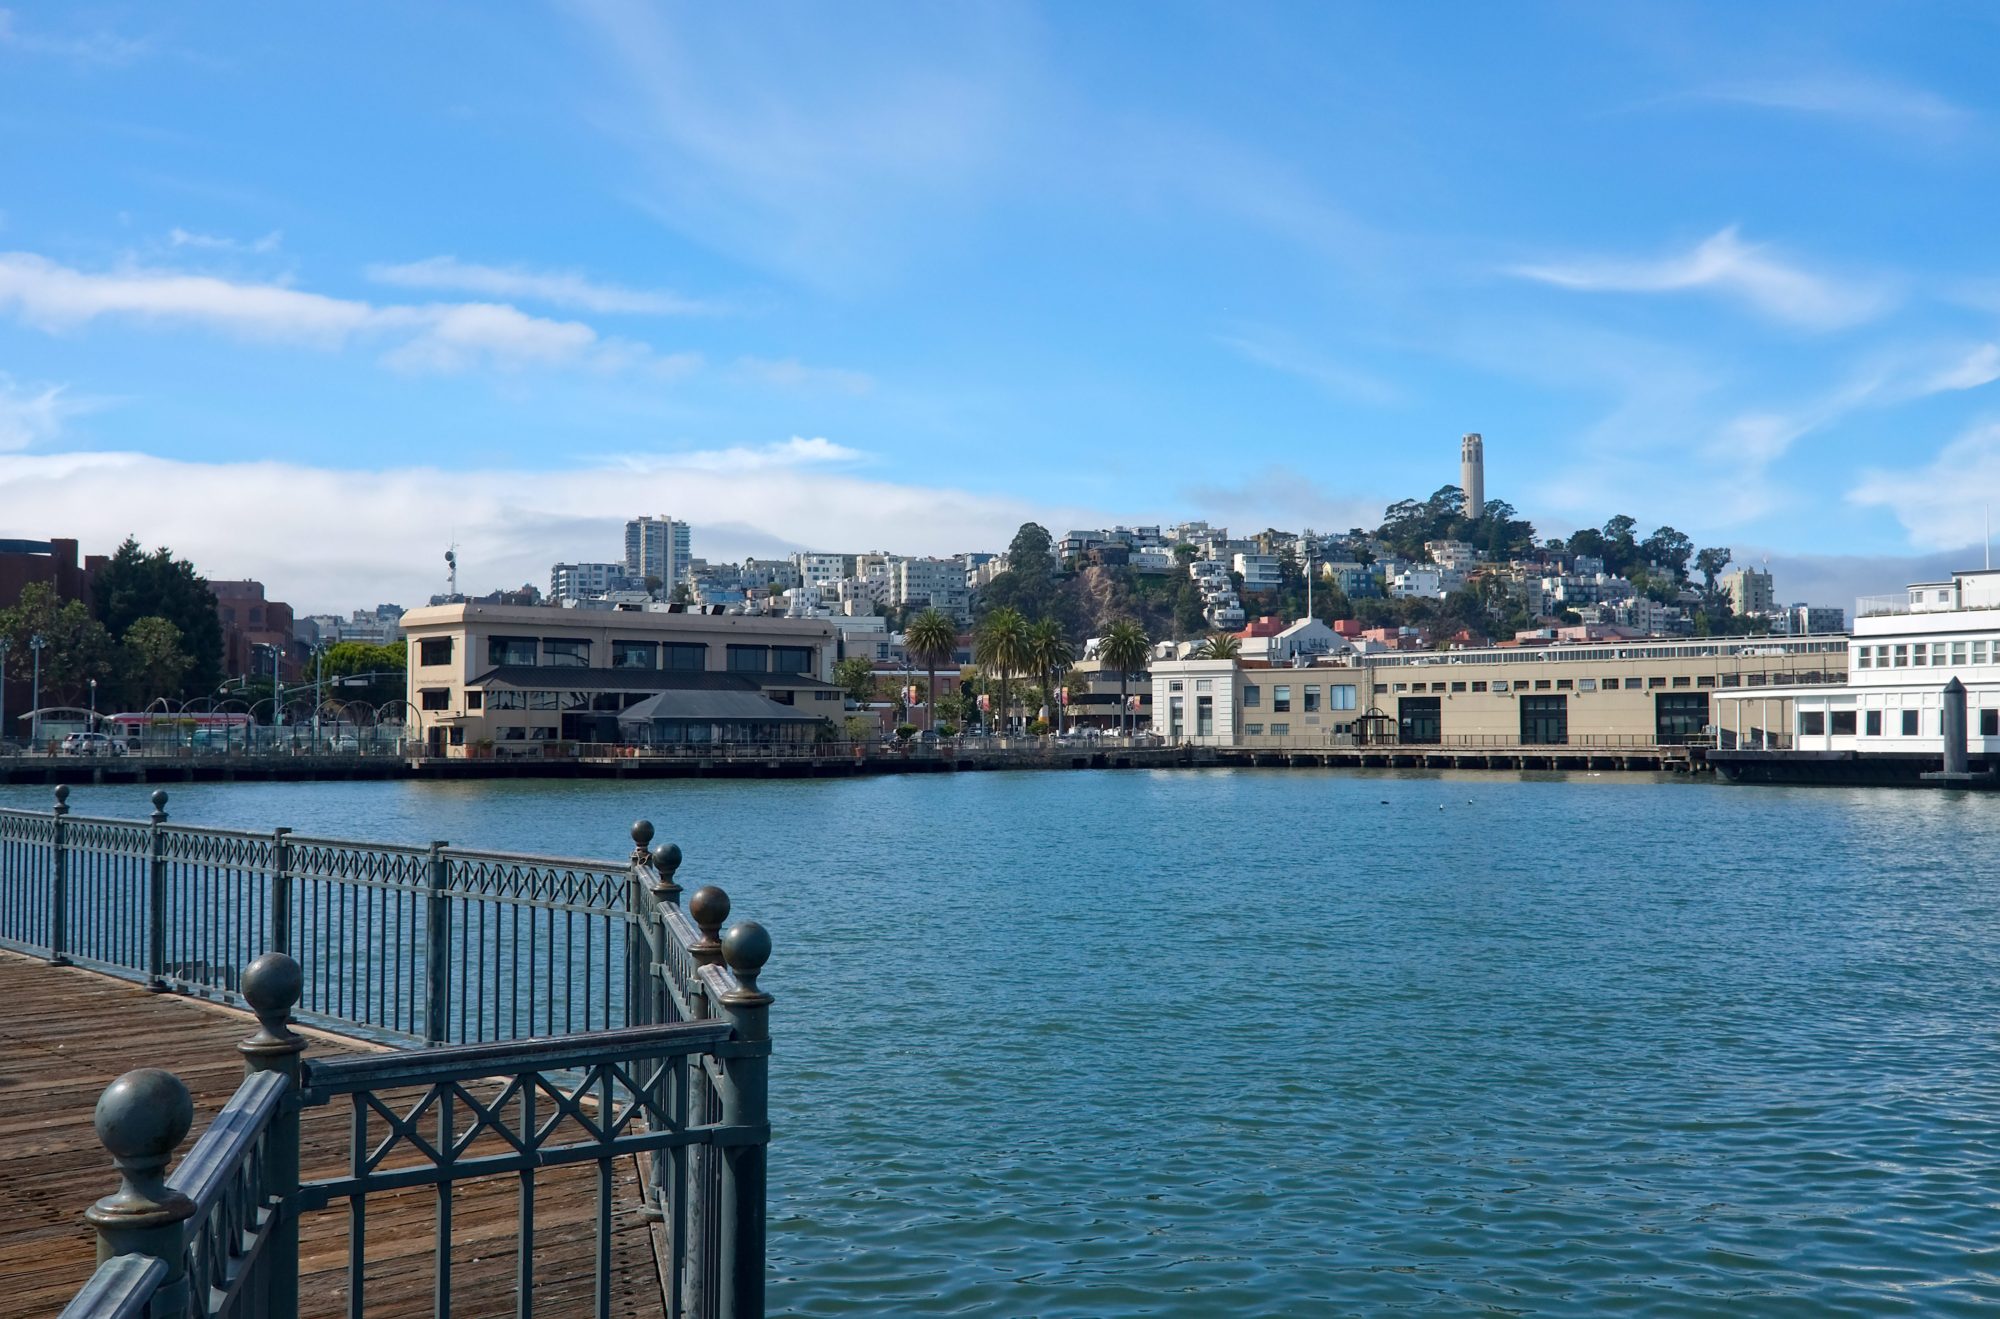 View of San Francisco from a pier